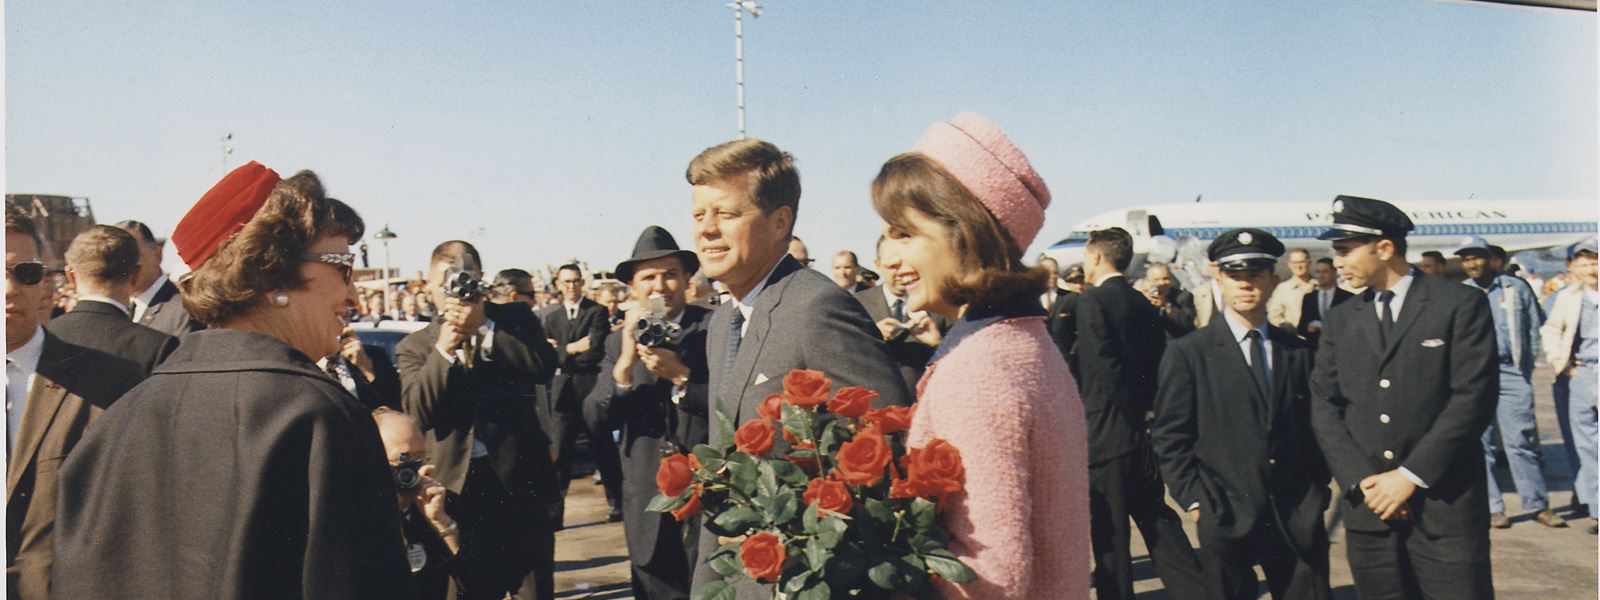 Image from 'JFK Revisited: Through the Looking Glass'